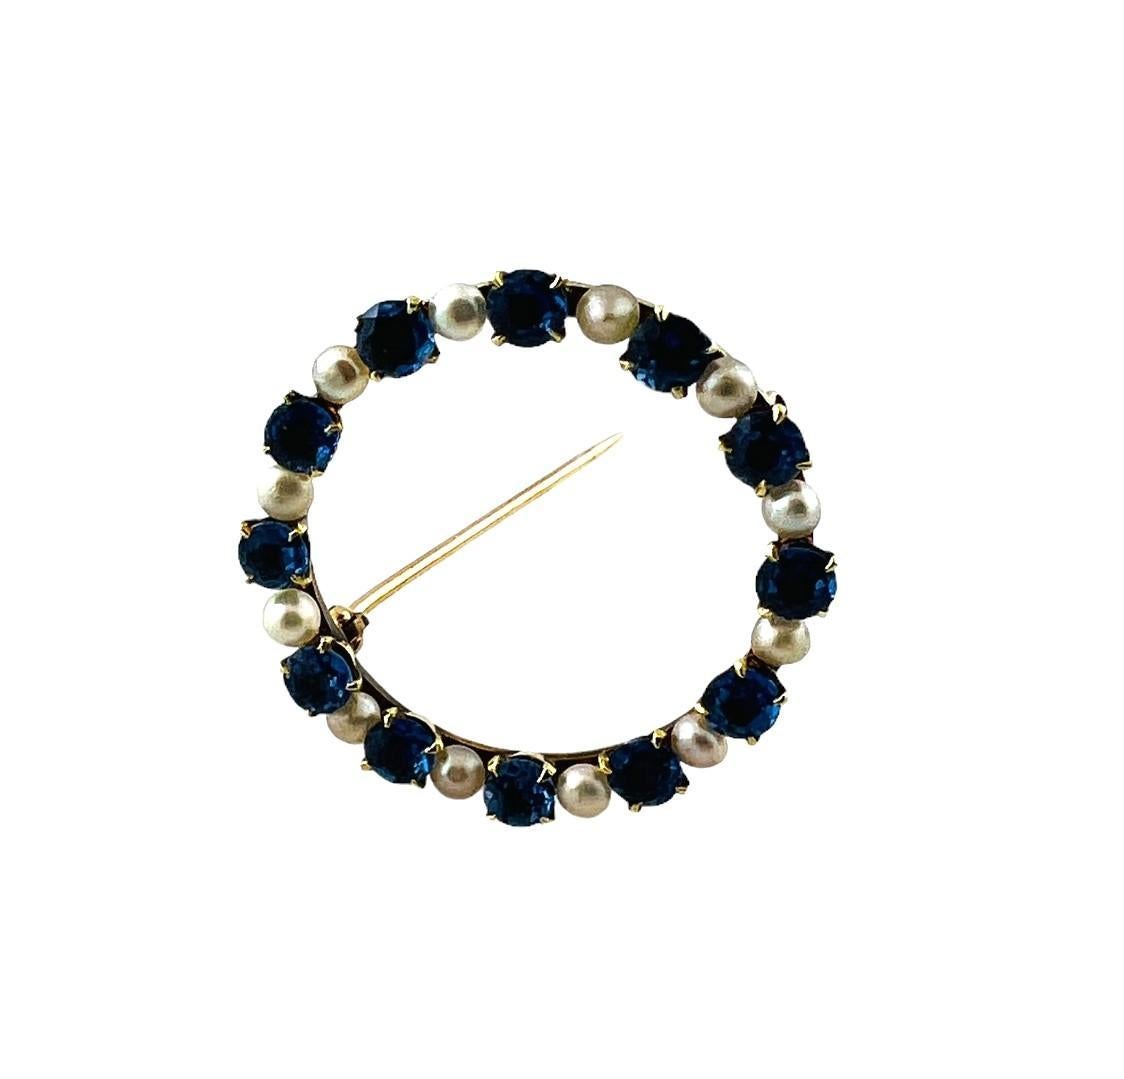 Vintage 14K Yellow Gold Pearl & Natural Blue Sapphire Circle Brooch

This beautiful circle brooch features 12 gorgeous round cut natural blue sapphires and 12 white off round pearls!

Pearls: Approx. 1.6mm each

Sapphires measure 3.52mm X 3.47mm X